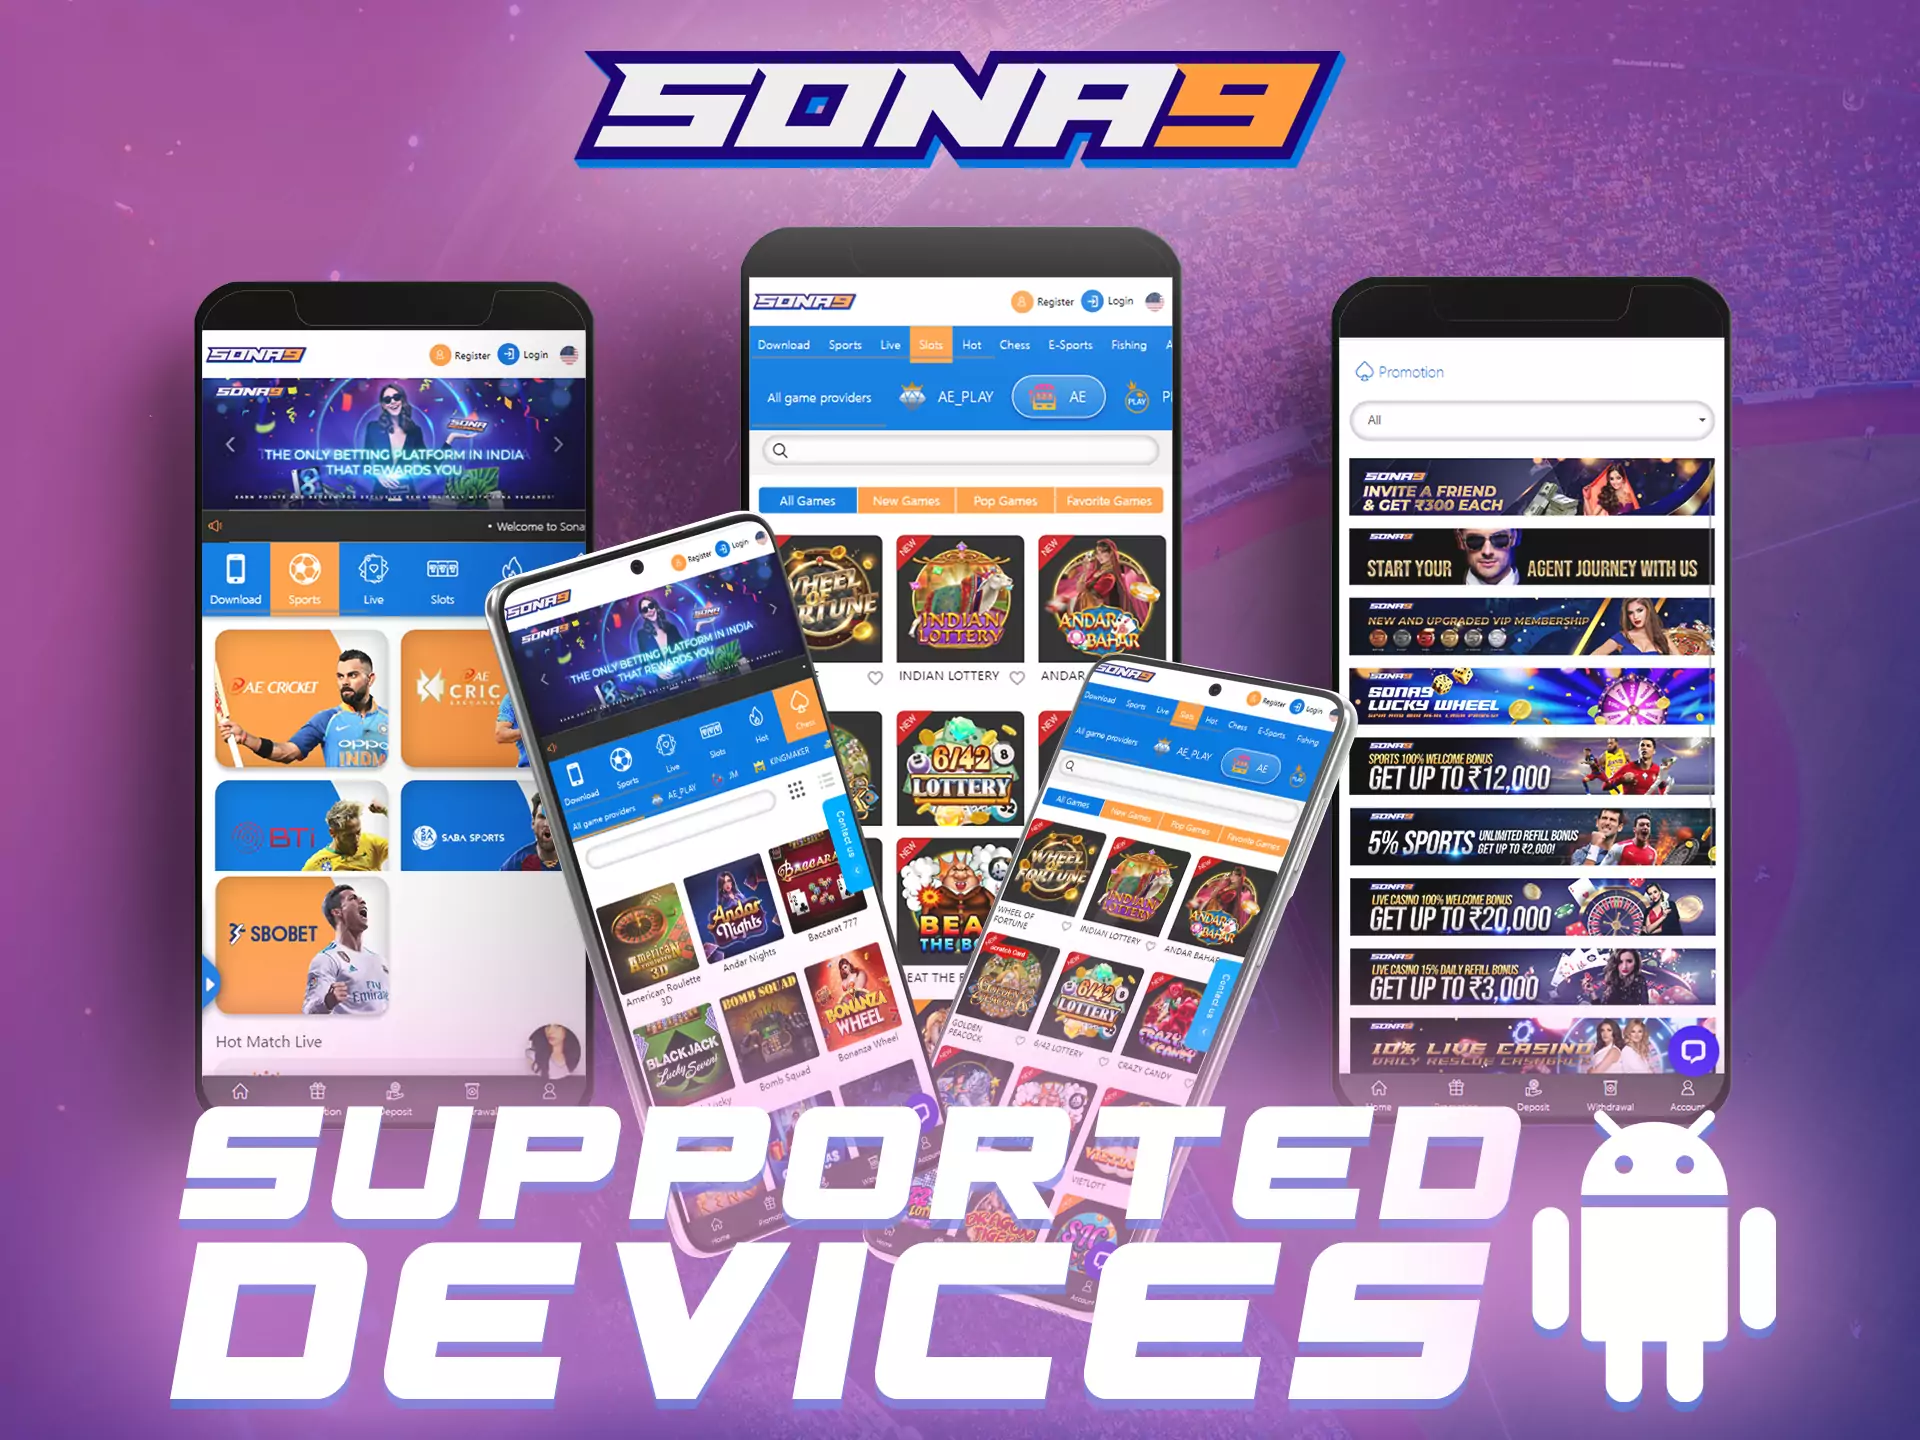 The Sona9 app works on any modern Android device.